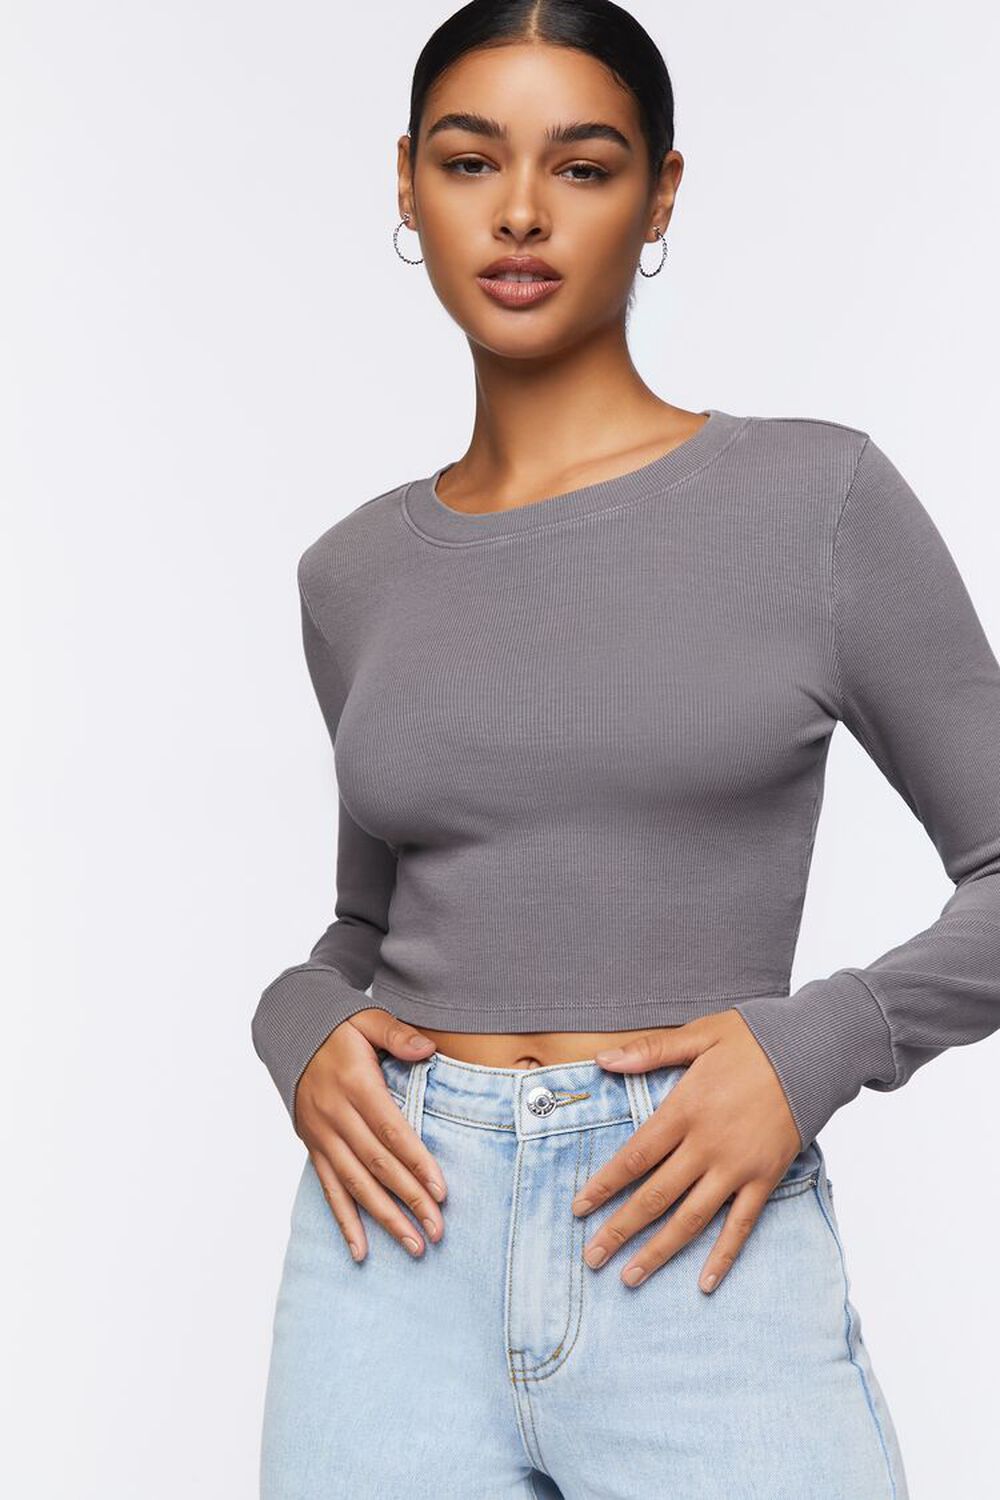 CHARCOAL Ribbed Long-Sleeve Crop Top, image 1